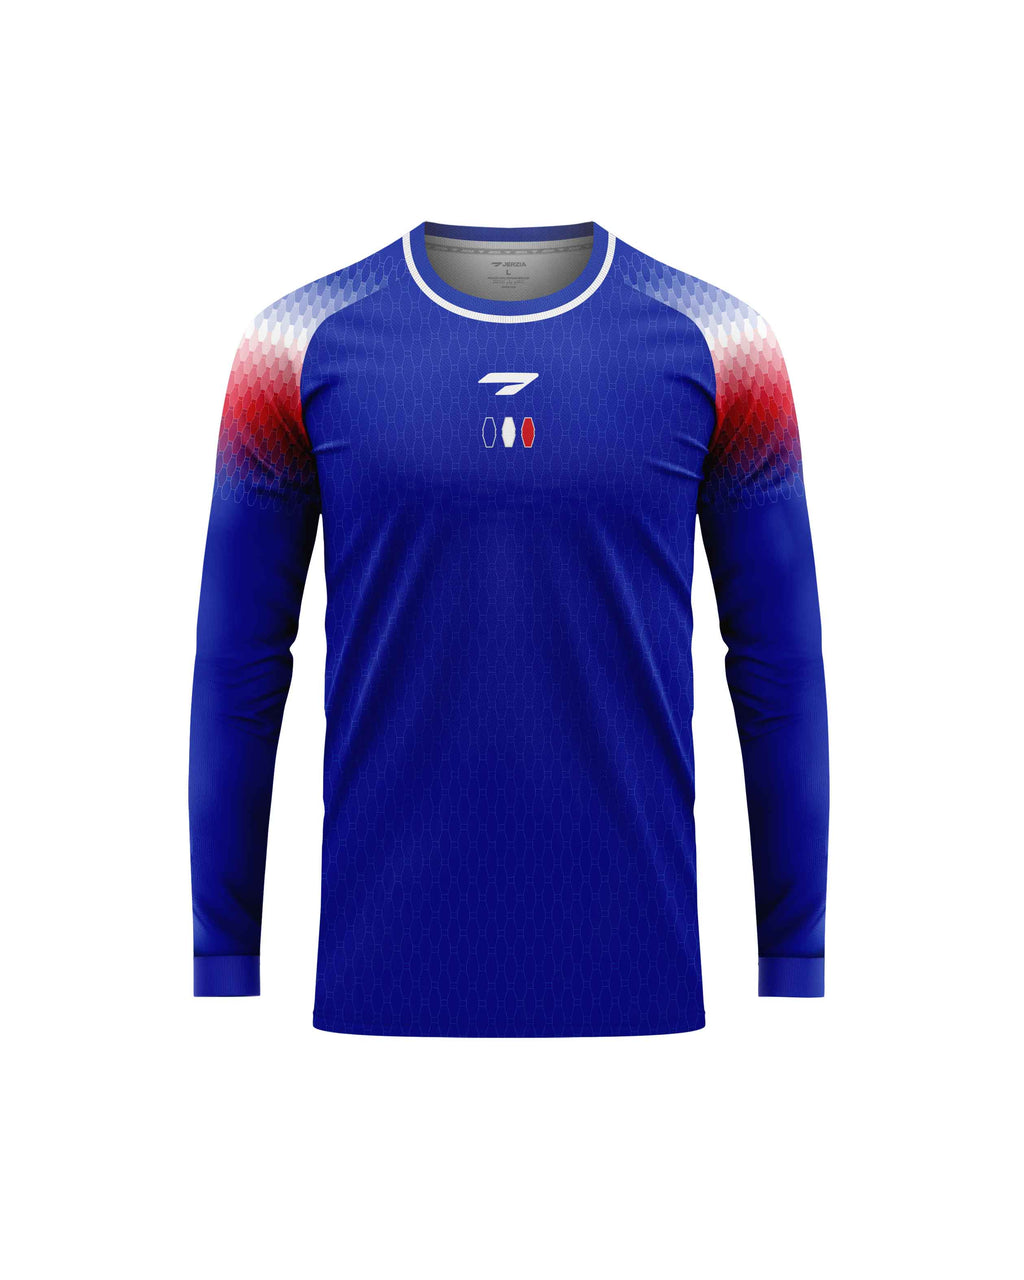 Euro 24 France Home LS